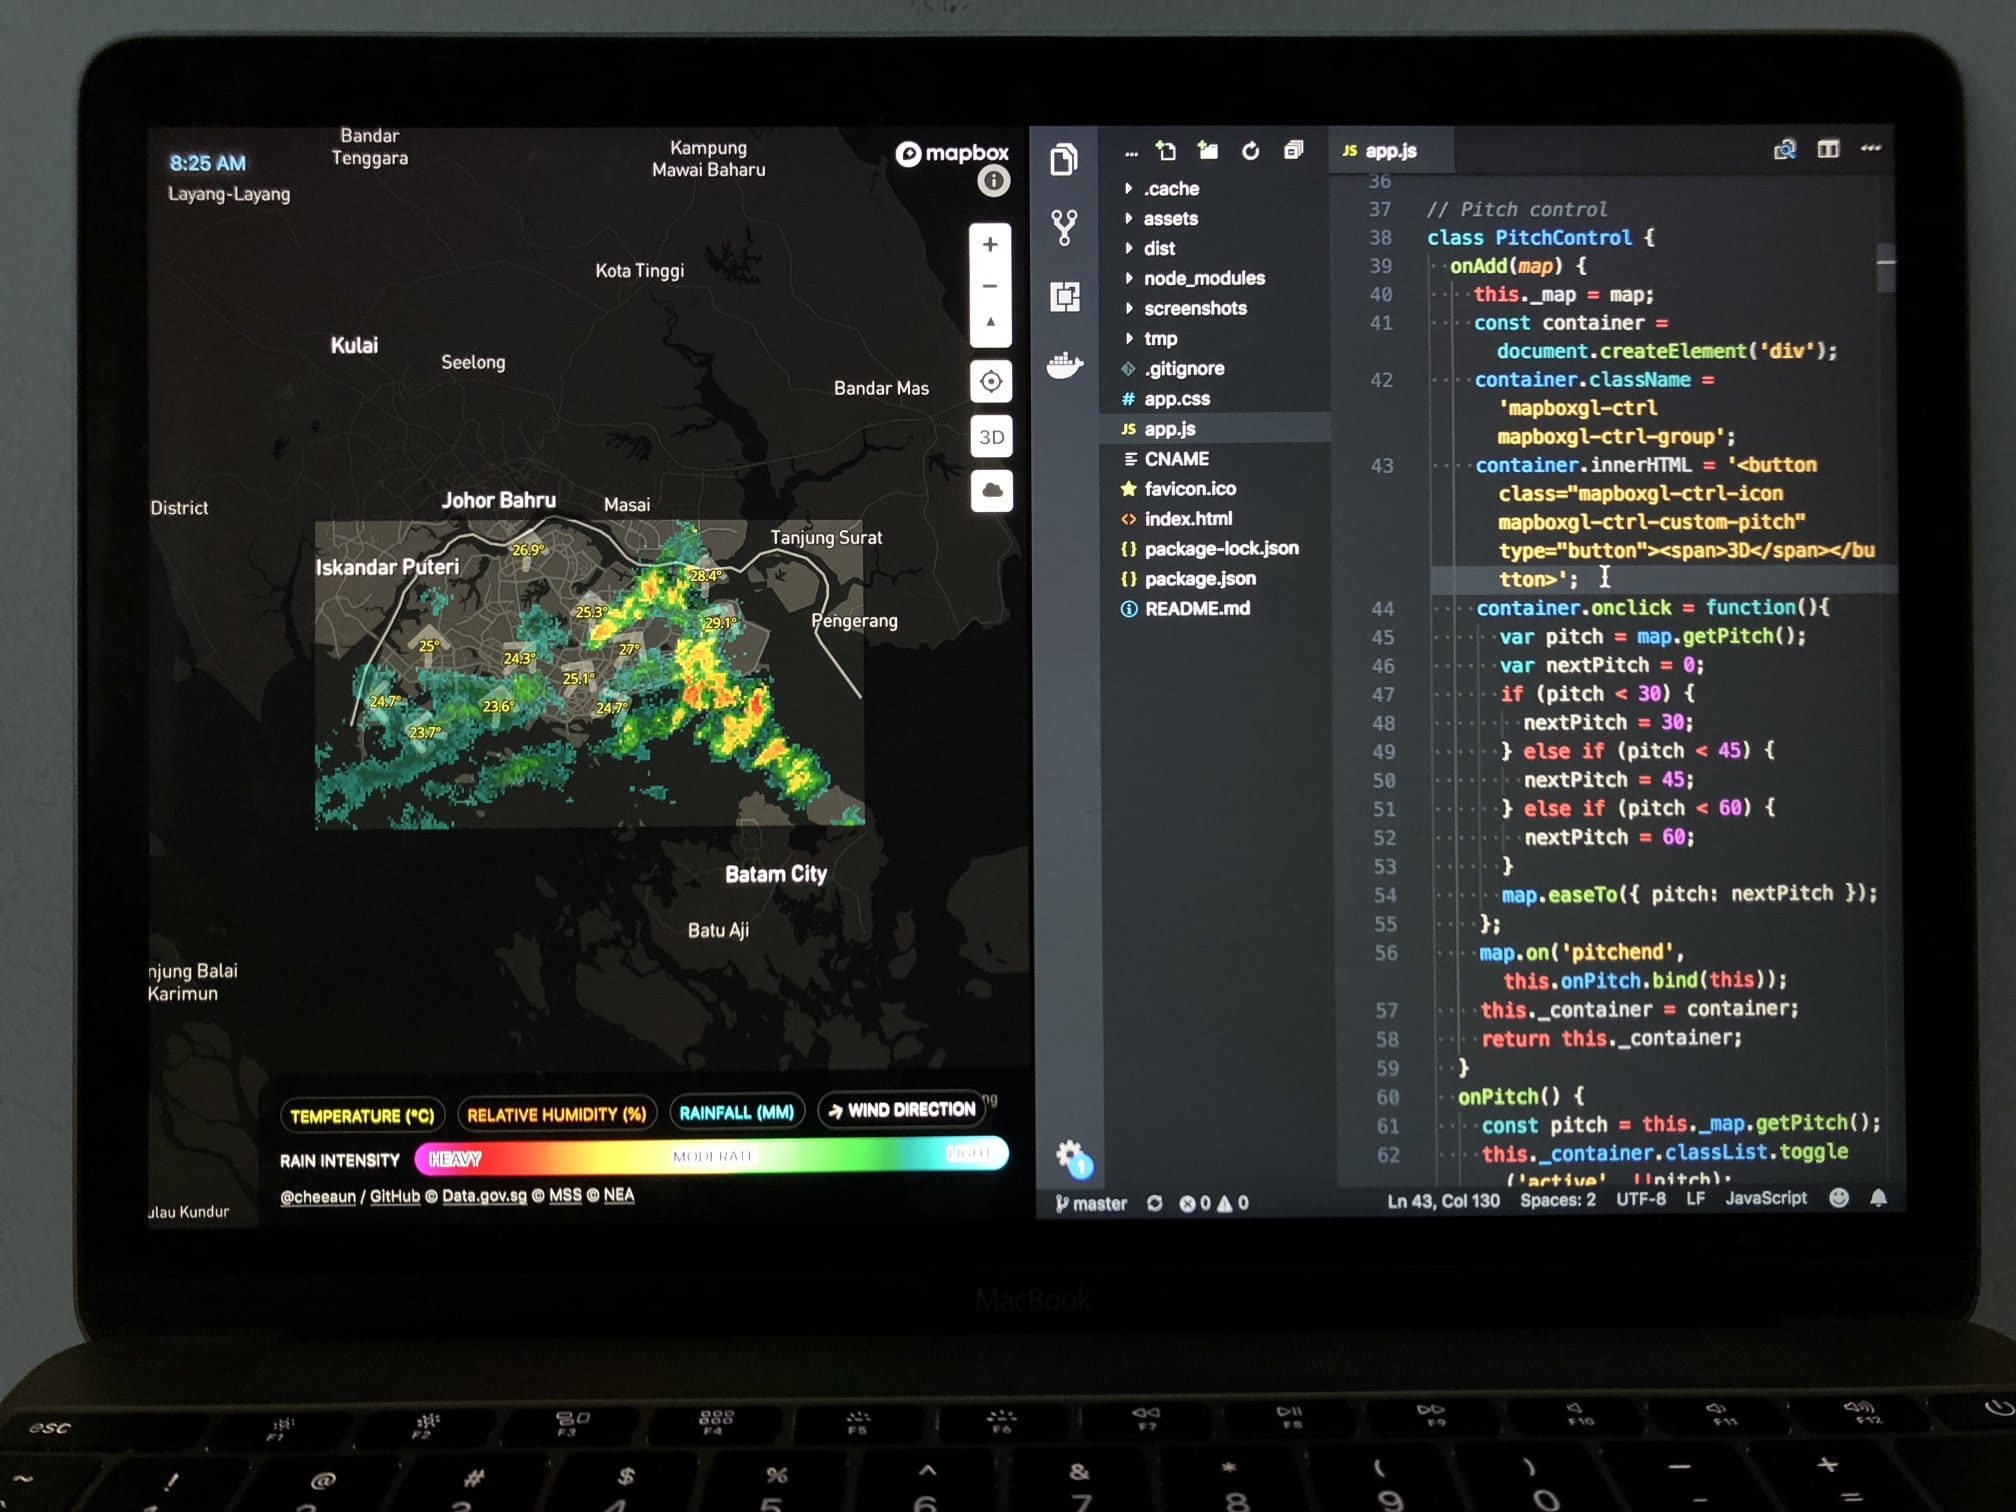 Check Weather SG website and Visual Code editor, on Macbook